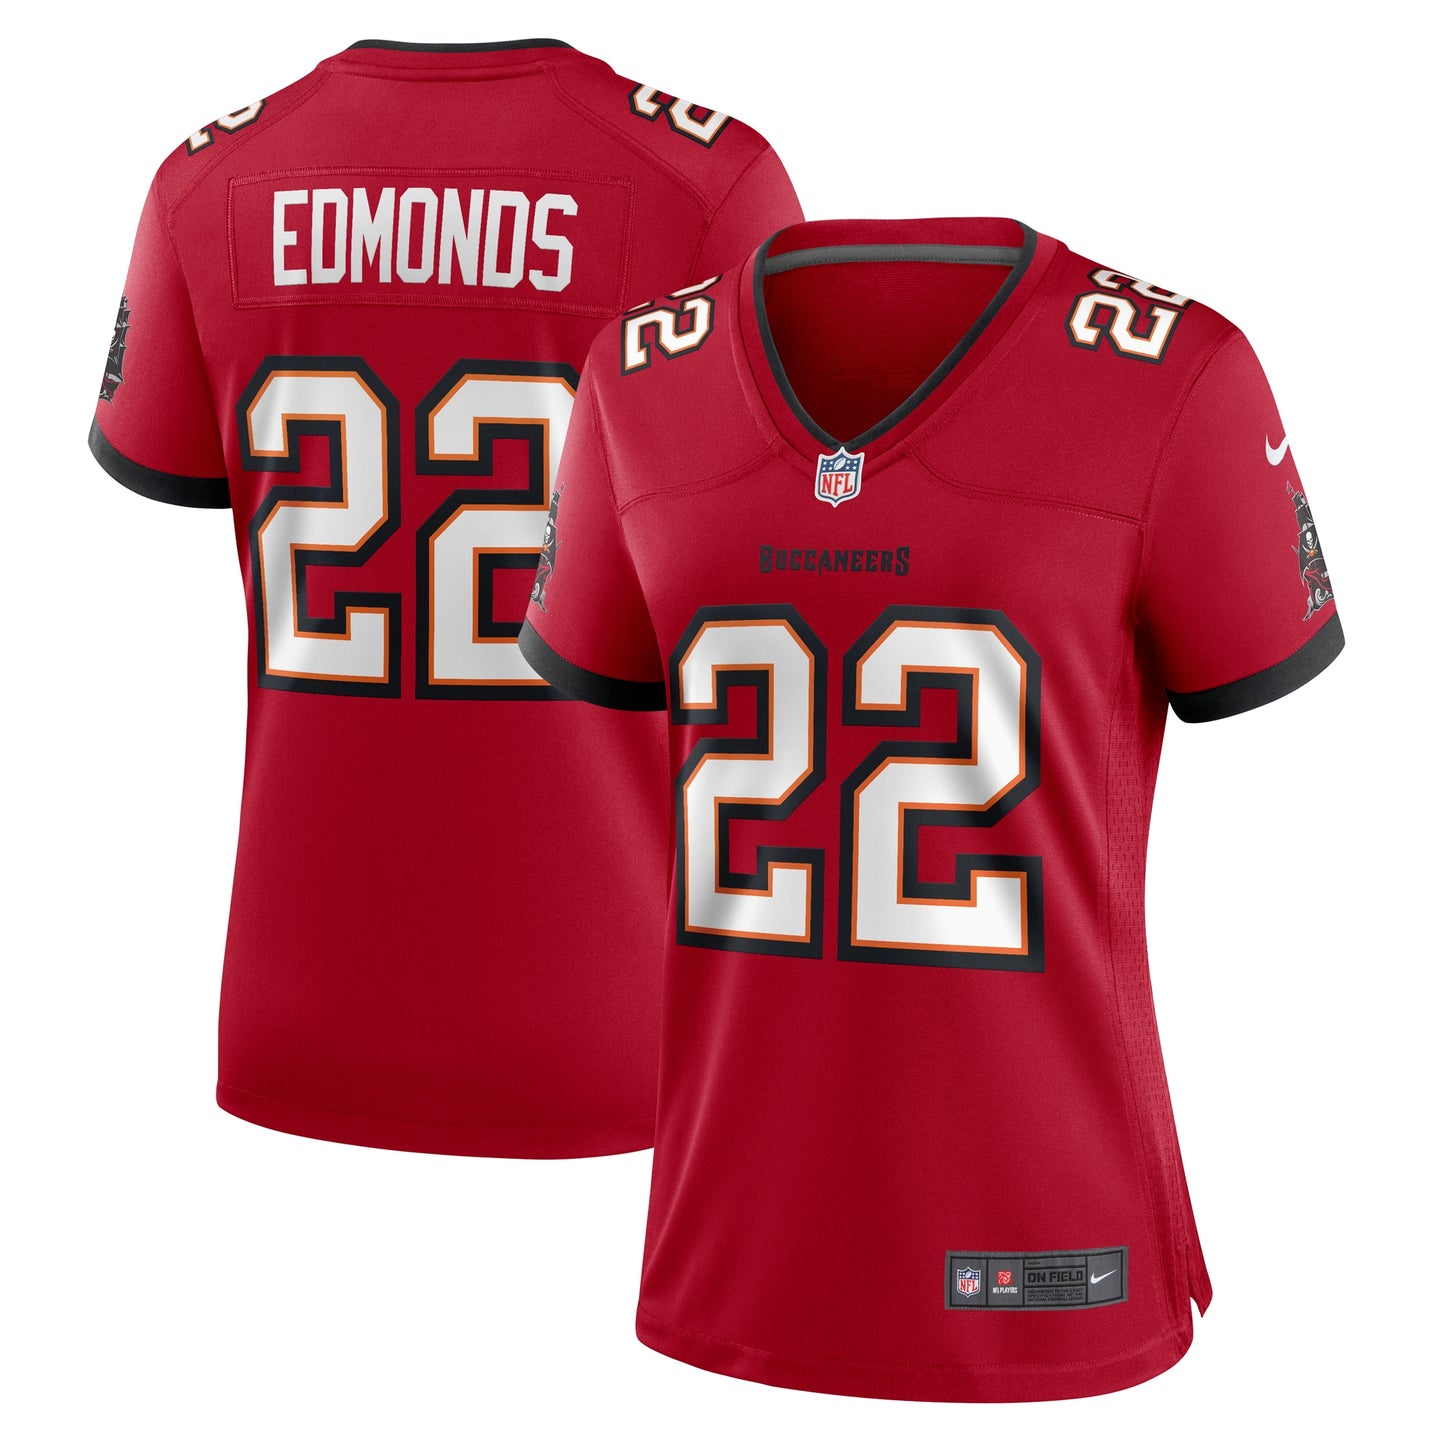 Chase Edmonds Tampa Bay Buccaneers Nike Women's Game Jersey - Red